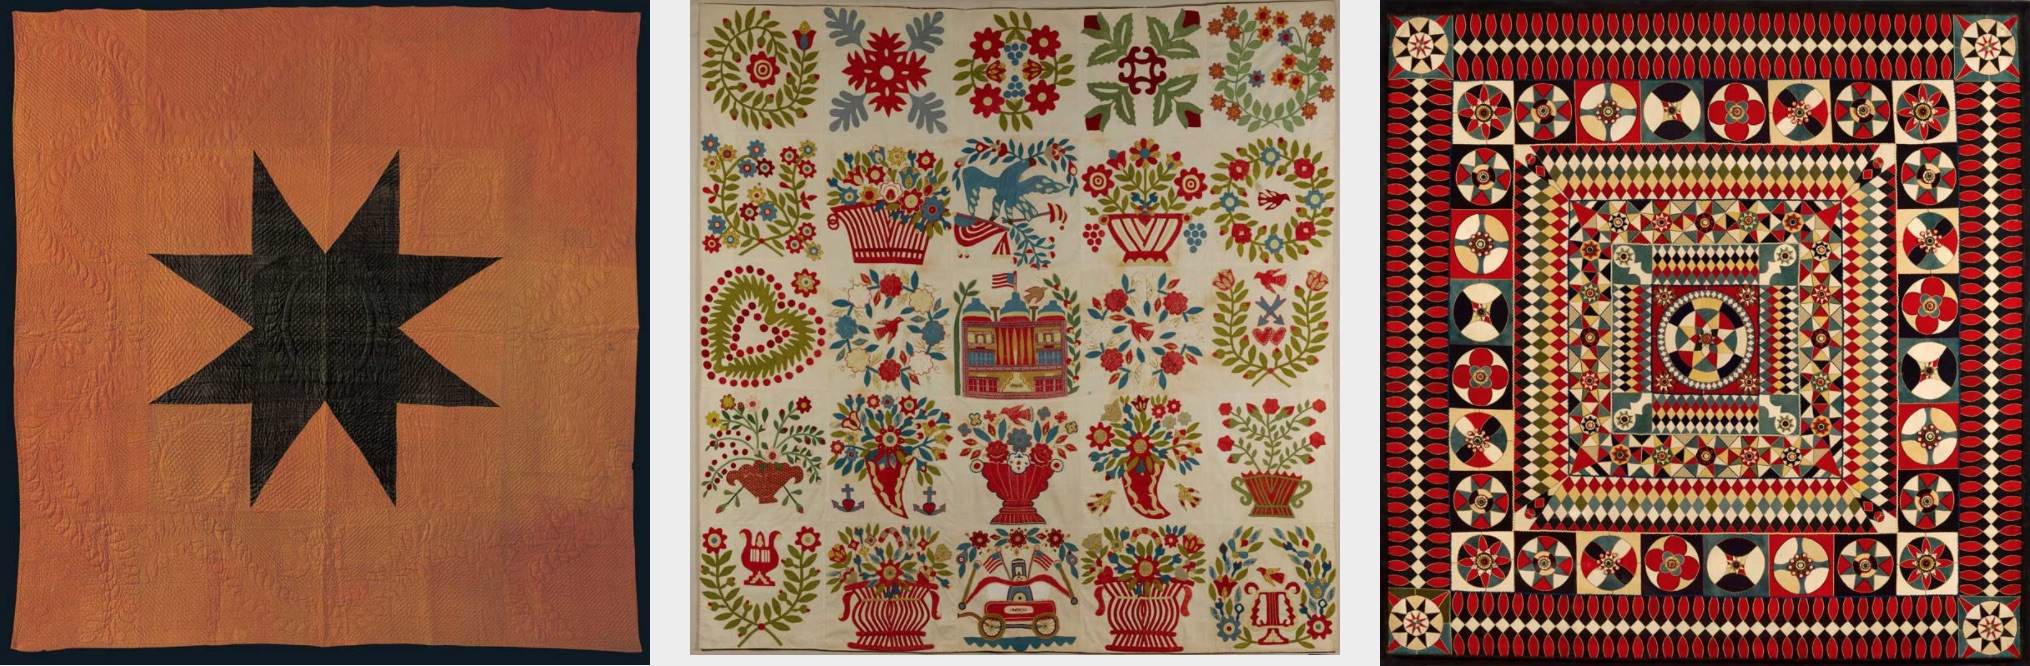 quilts-masterworks-from-the-american-folk-art-museum.jpg